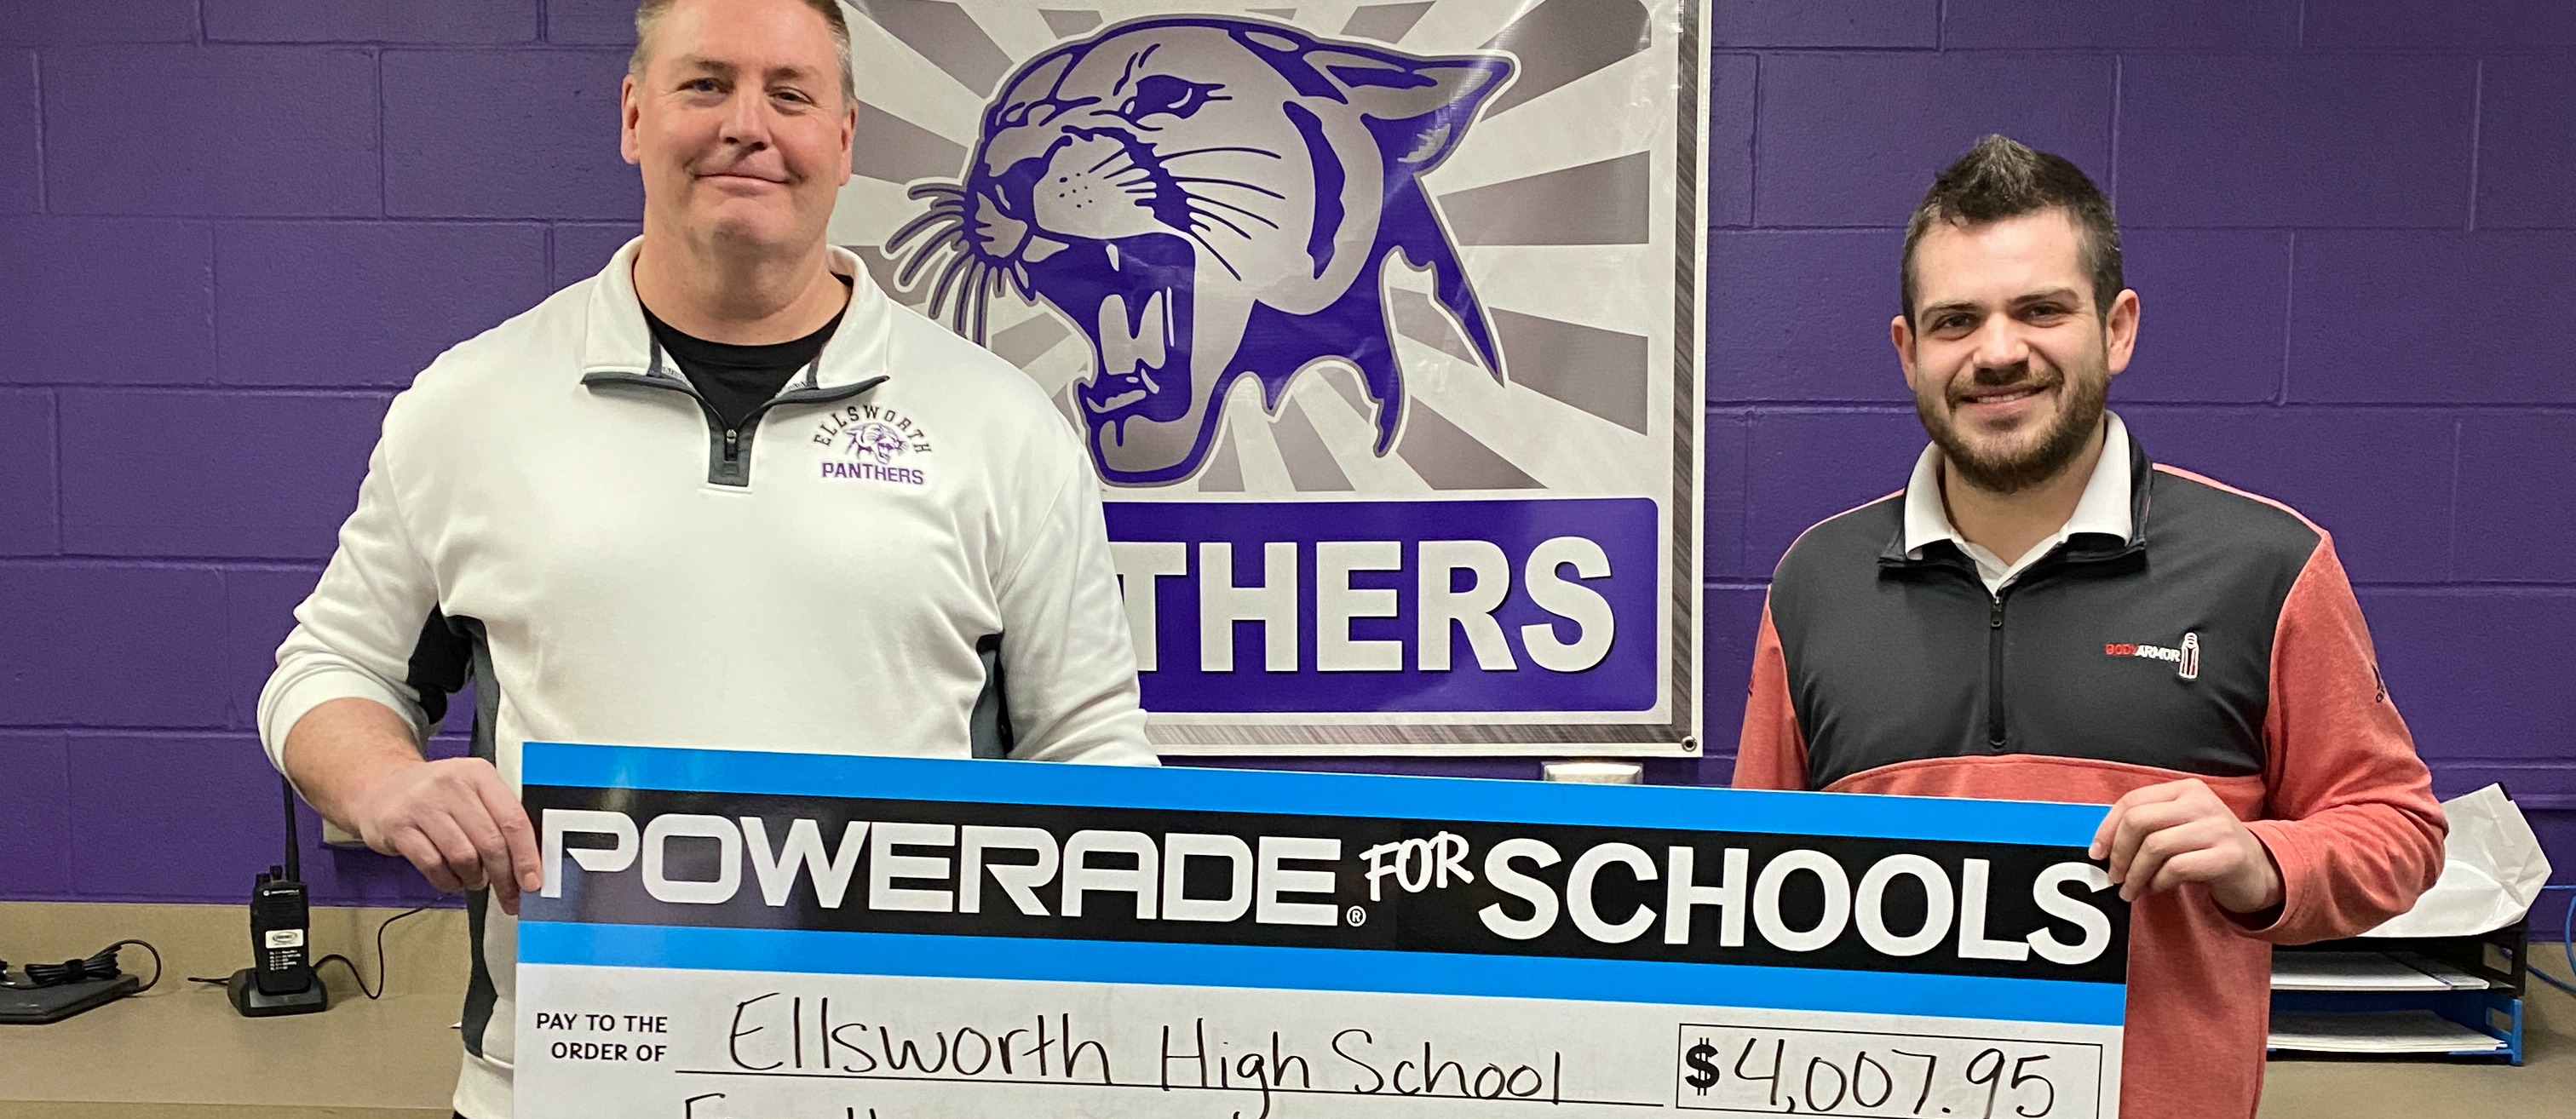 EHS received a generous check for $4007.95 from Powerade 4 Schools by Viking Coca-Cola! 💵💧 The POWERADE® Power Your School program is making a difference in our community, supporting teens, parents, coaches, and high schools like ours.